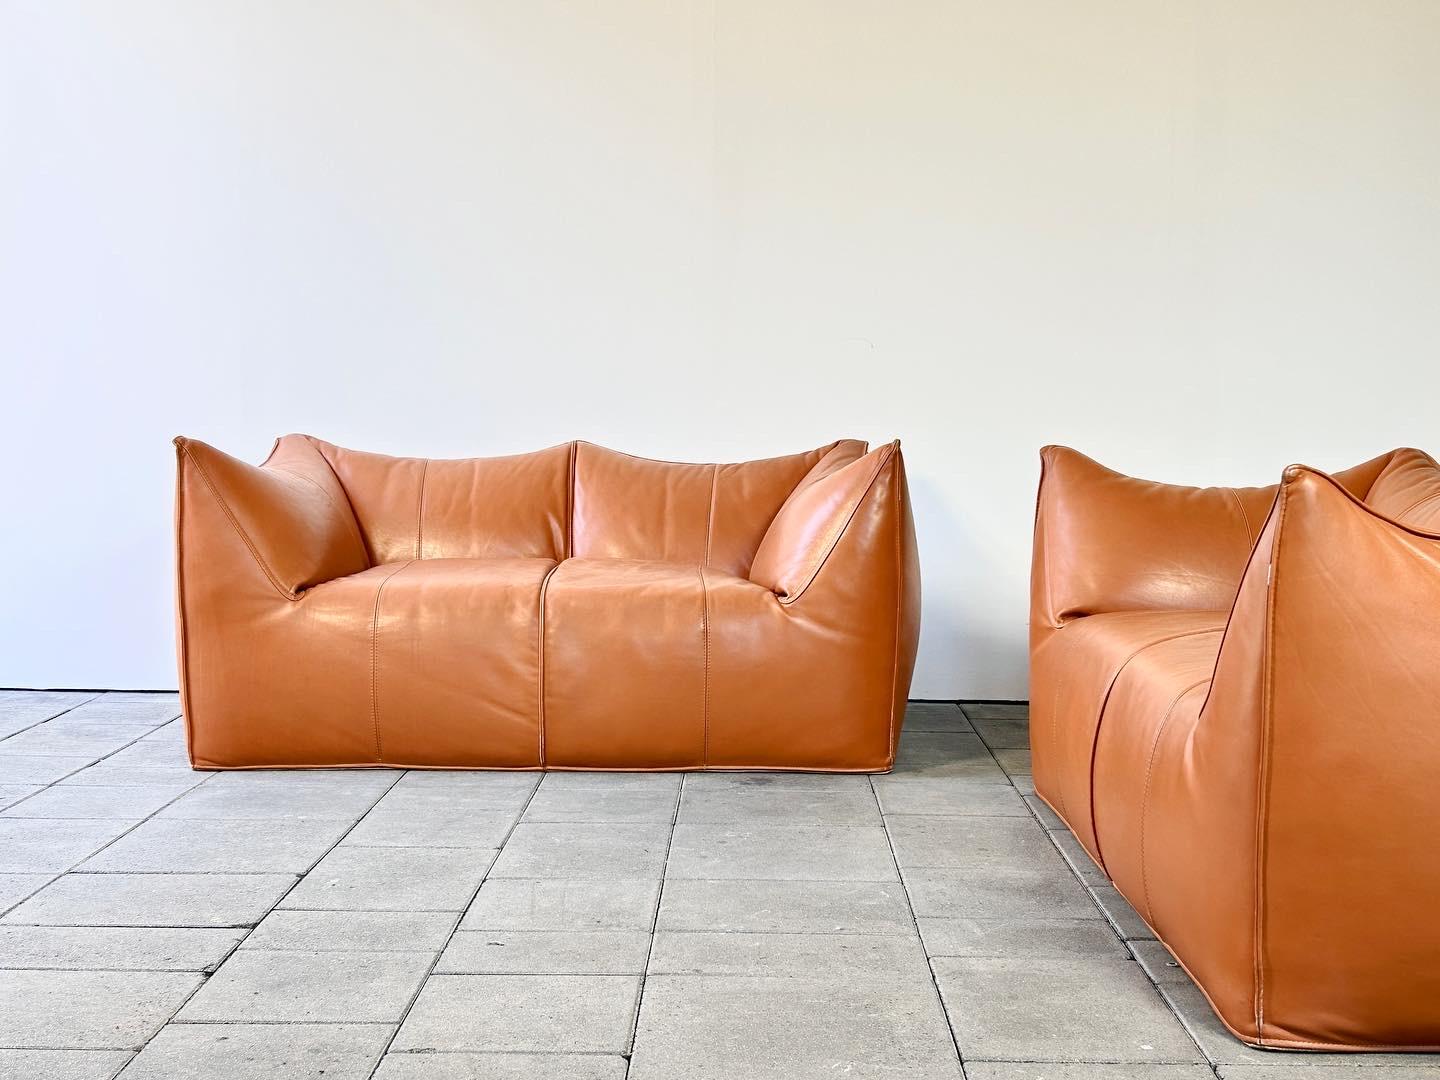 cognac leather Le Bambole-seater Sofa designed by Mario Bellini for B&B Italia in 1978. 

Price per sofa, second matching sofa available.

The Bambole series today is a true icon amongst the 1970s design furnitures and did win Mario Bellini the